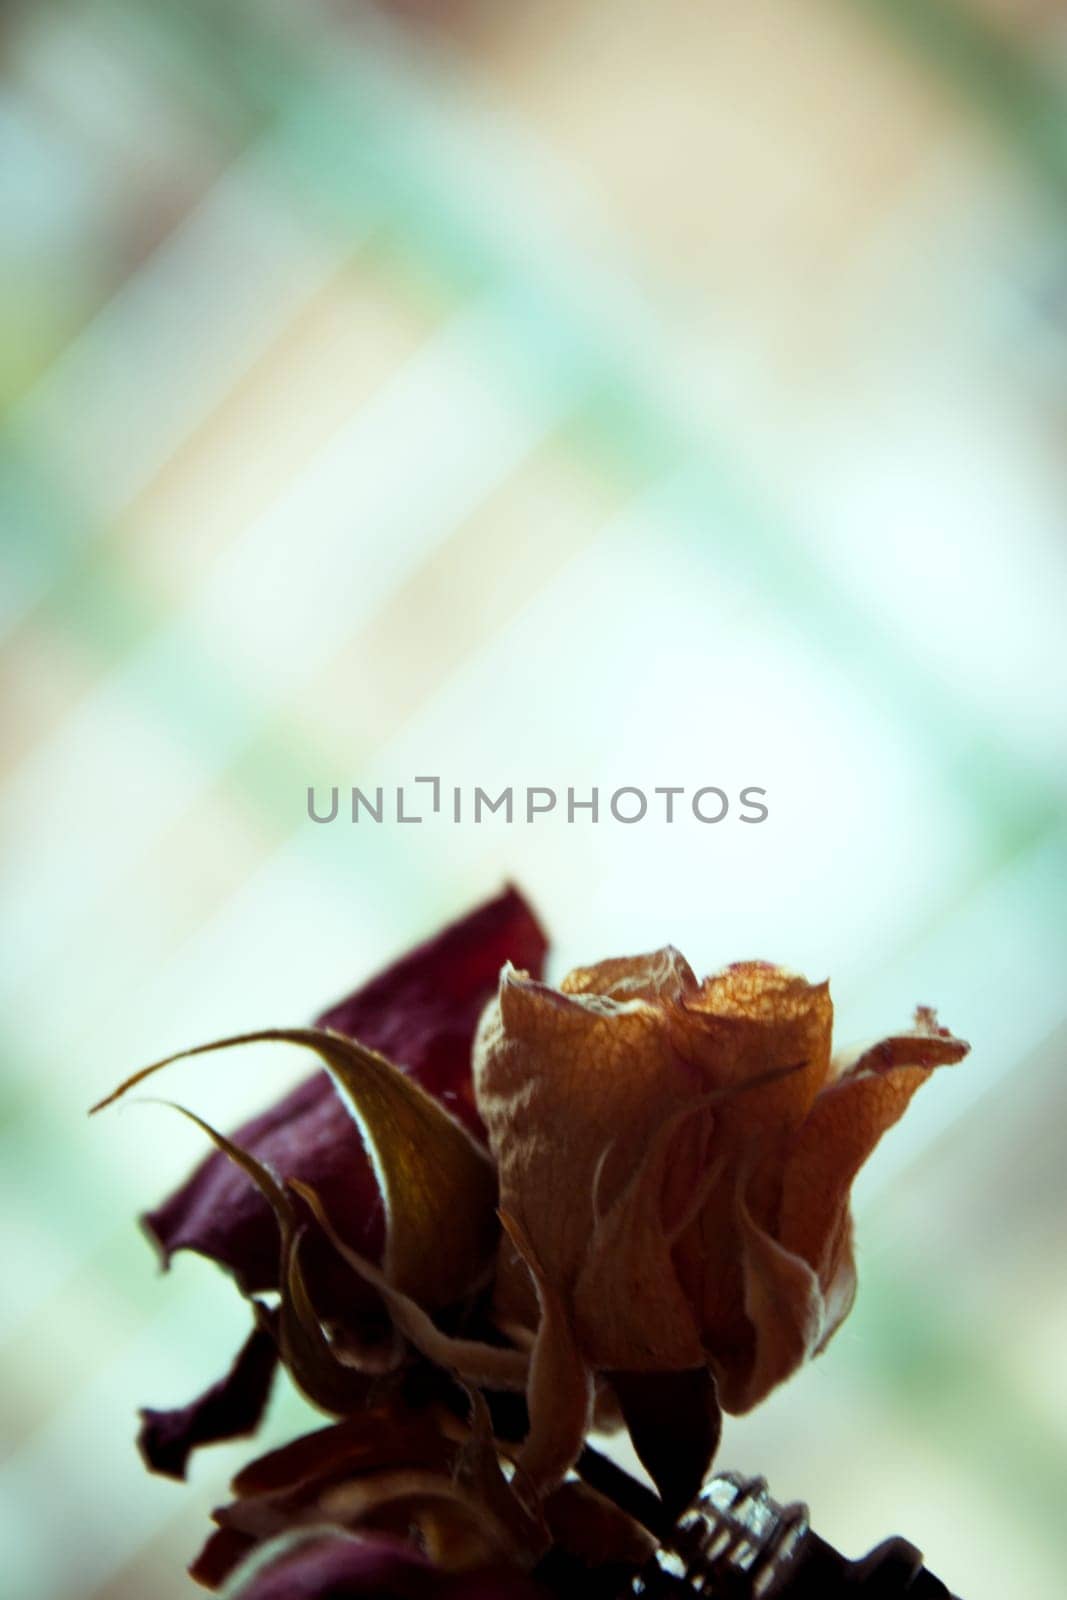 One yellow rose and two dried red ones by GemaIbarra